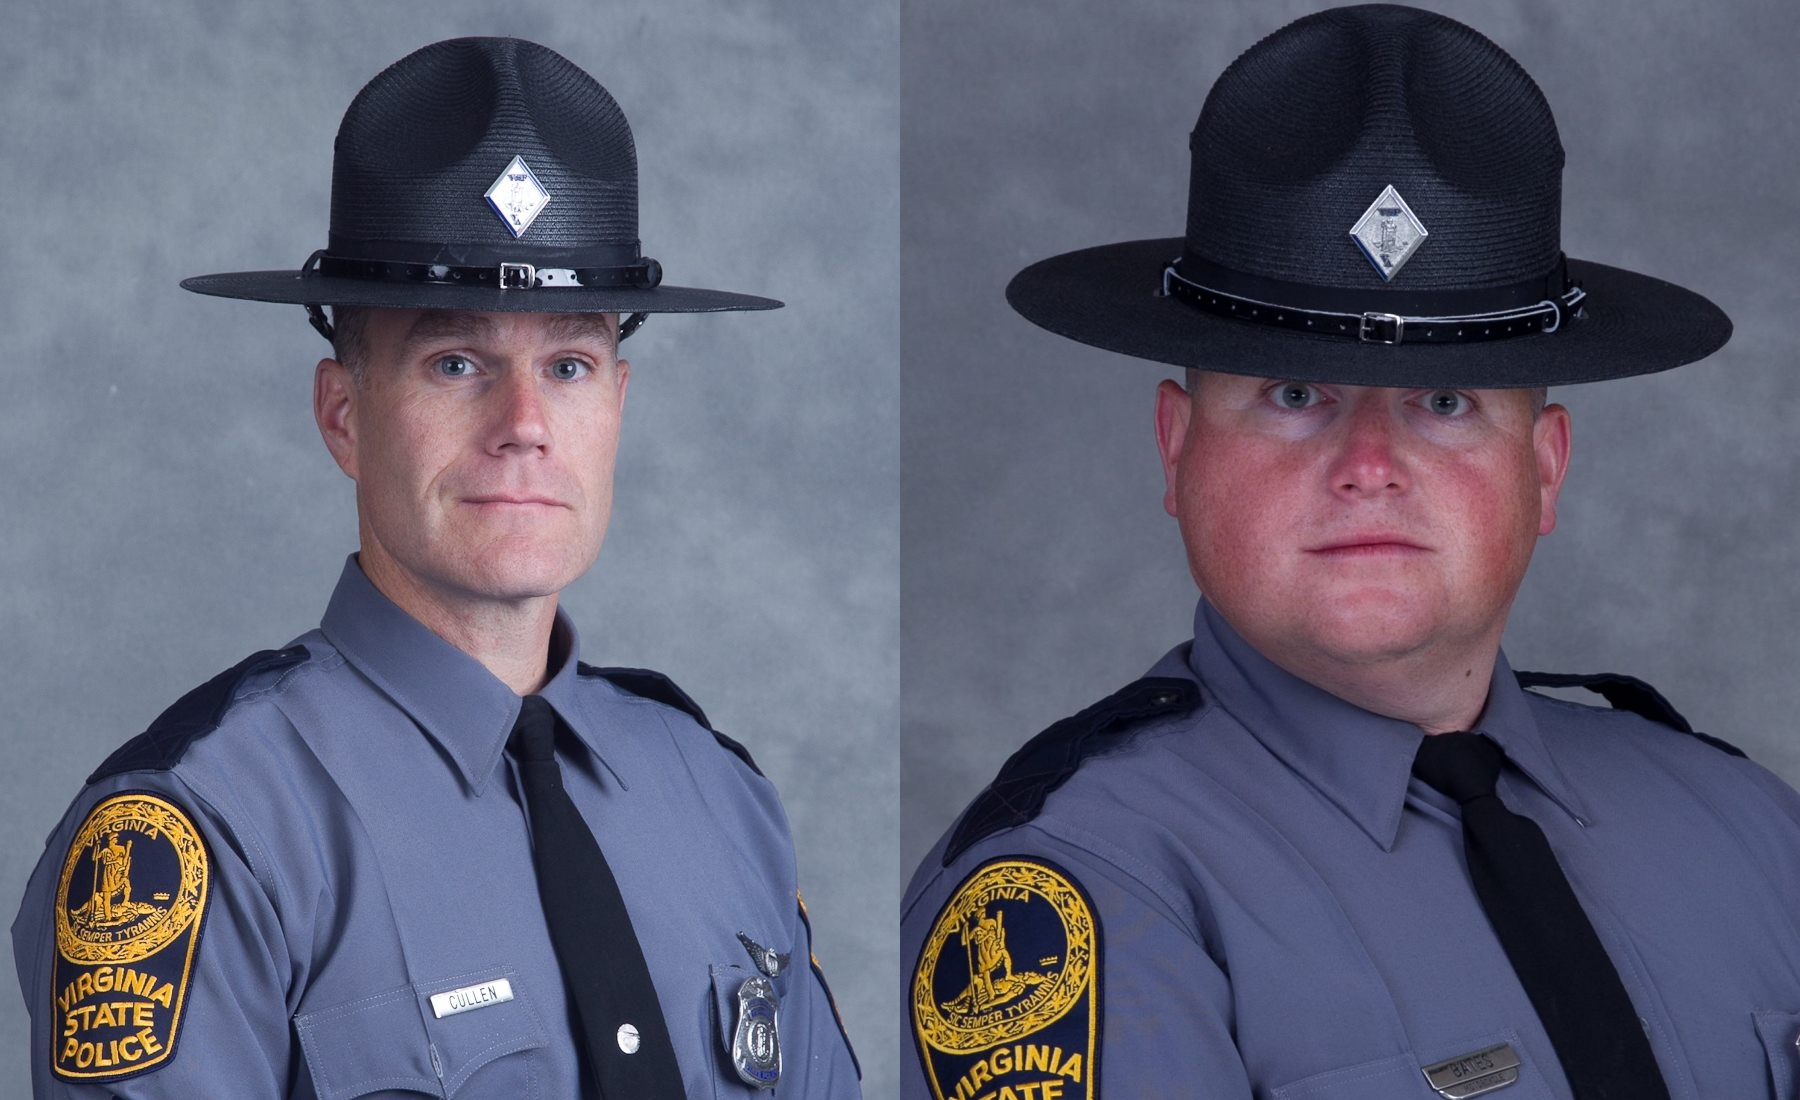 Lieutenant H. Jay Cullen of Midlothian, Virginia, and Trooper-Pilot Berke M.M. Bates of Quinton, Virginia, died when their helicopter crashed on Aug. 12. Virginia State Police Photos